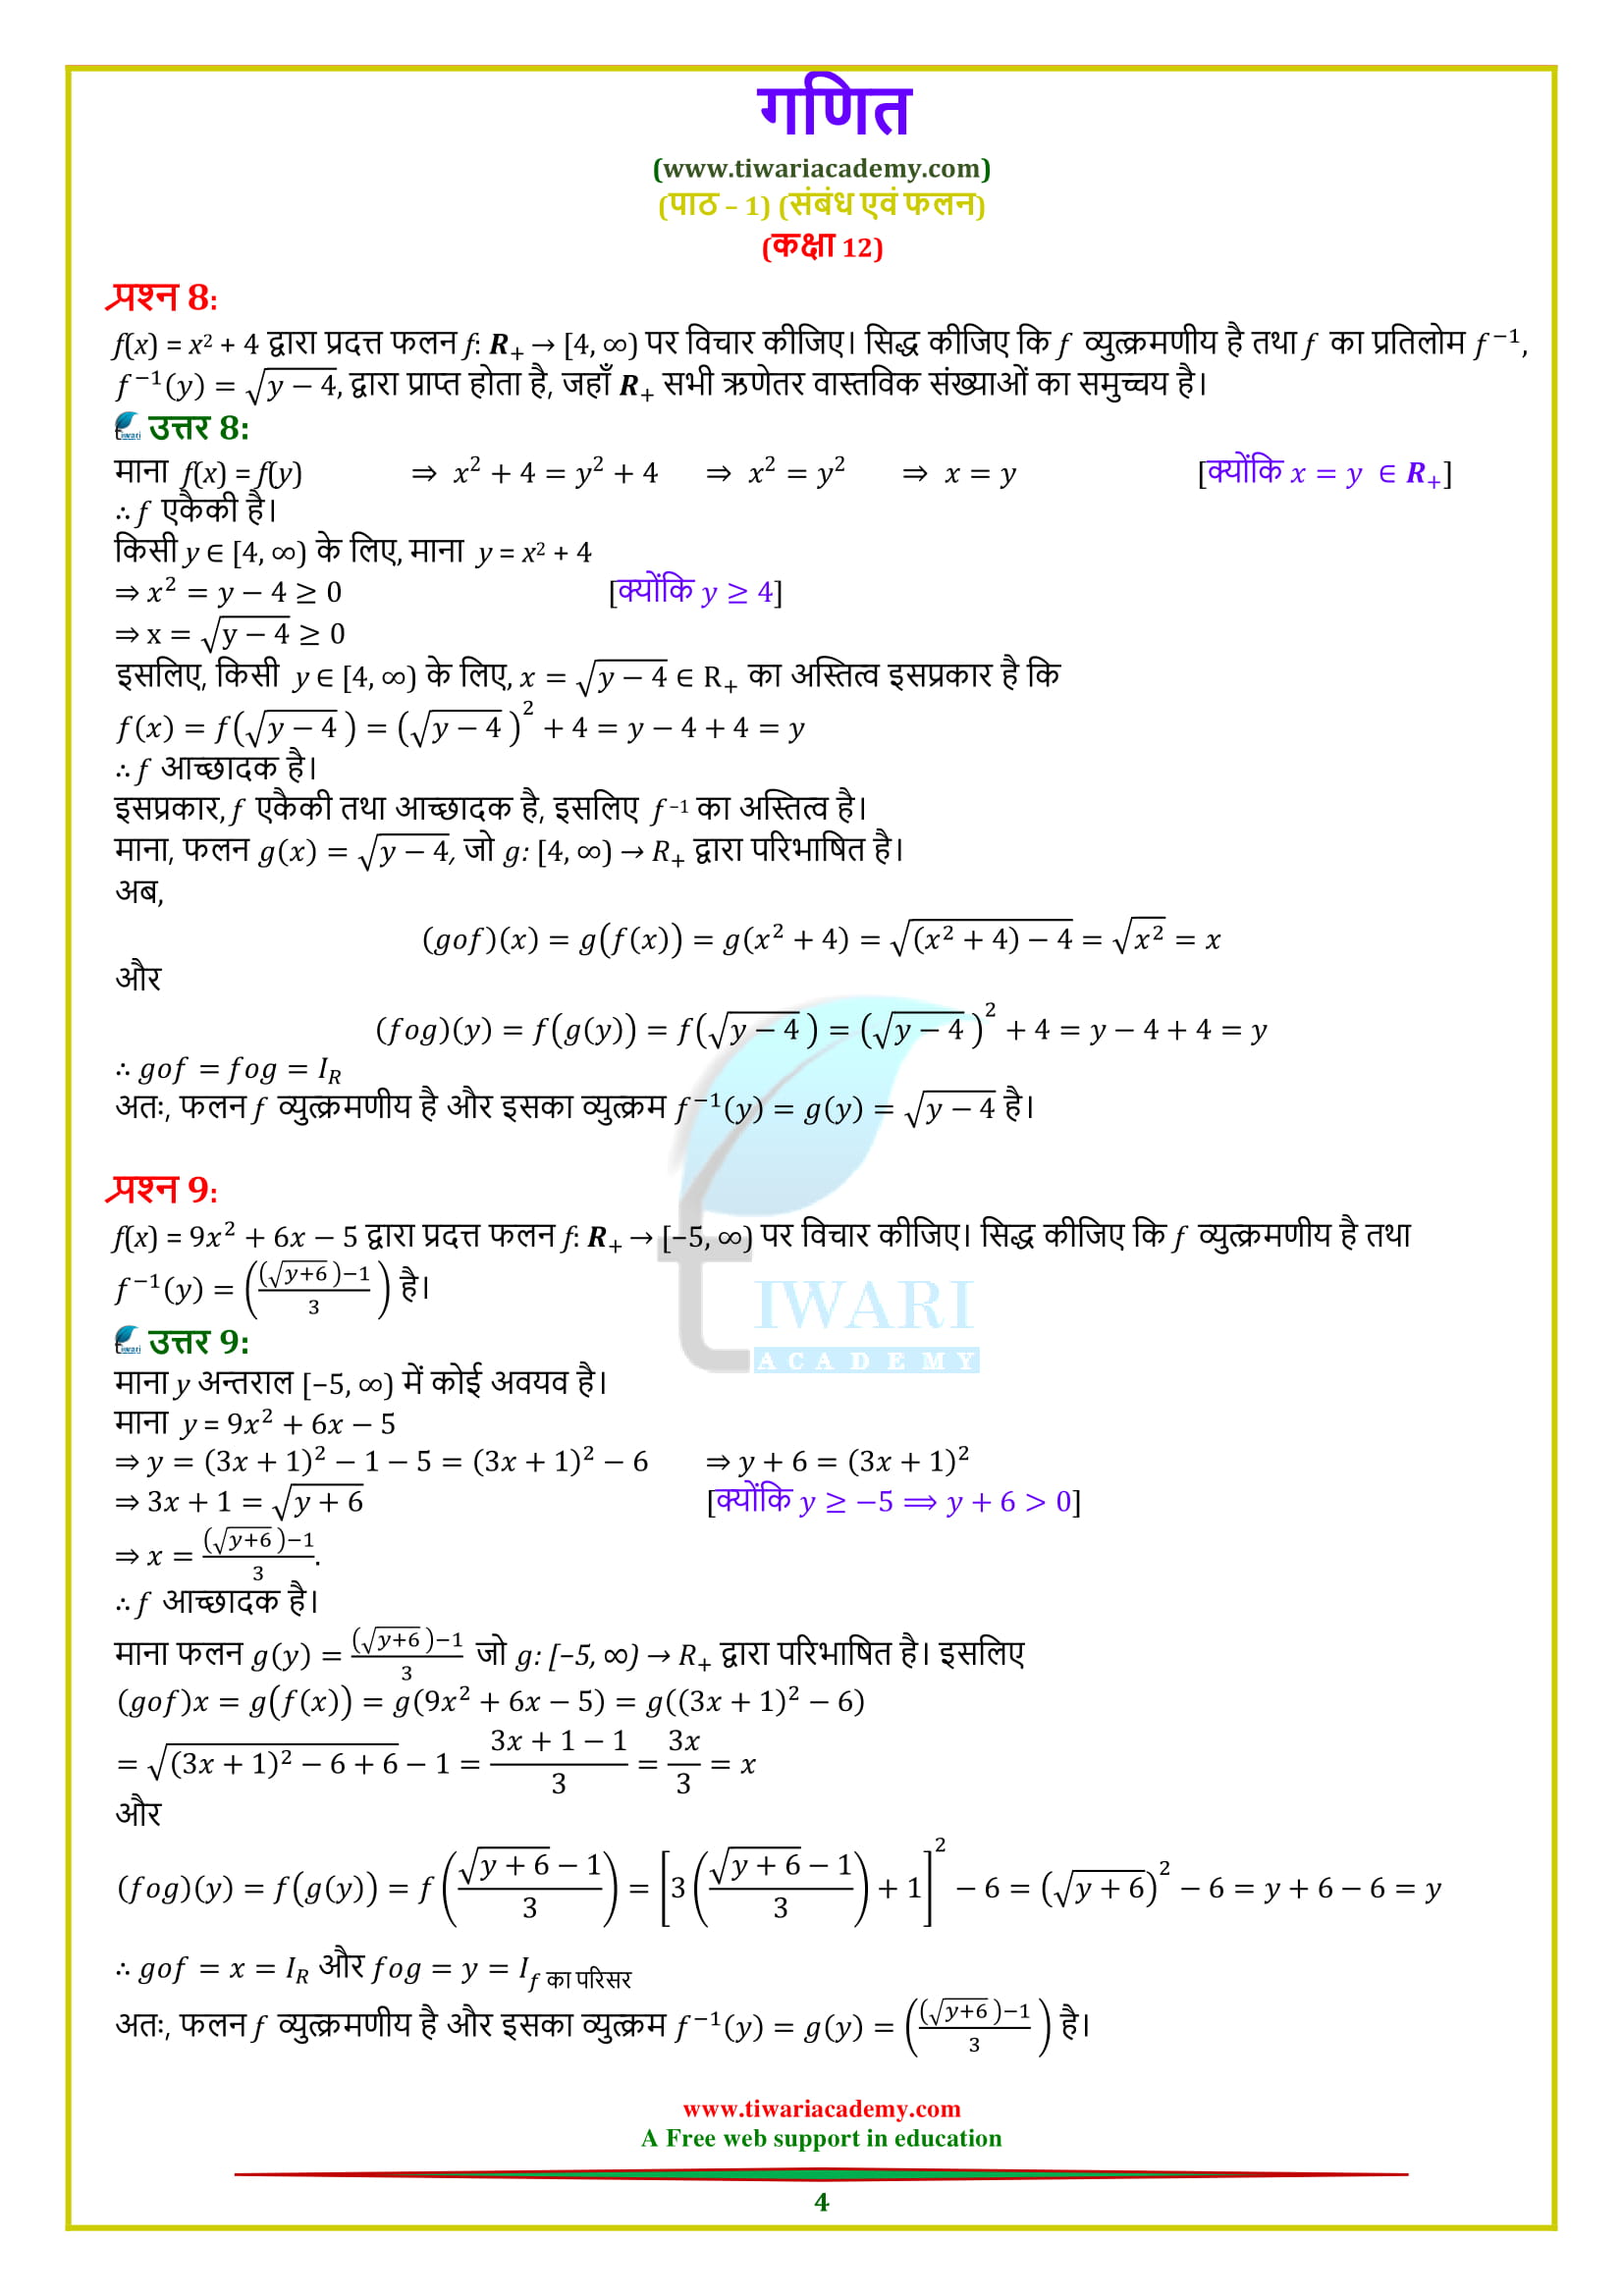 12 Maths Exercise 1.3 solutions updated for up board 2018-19.